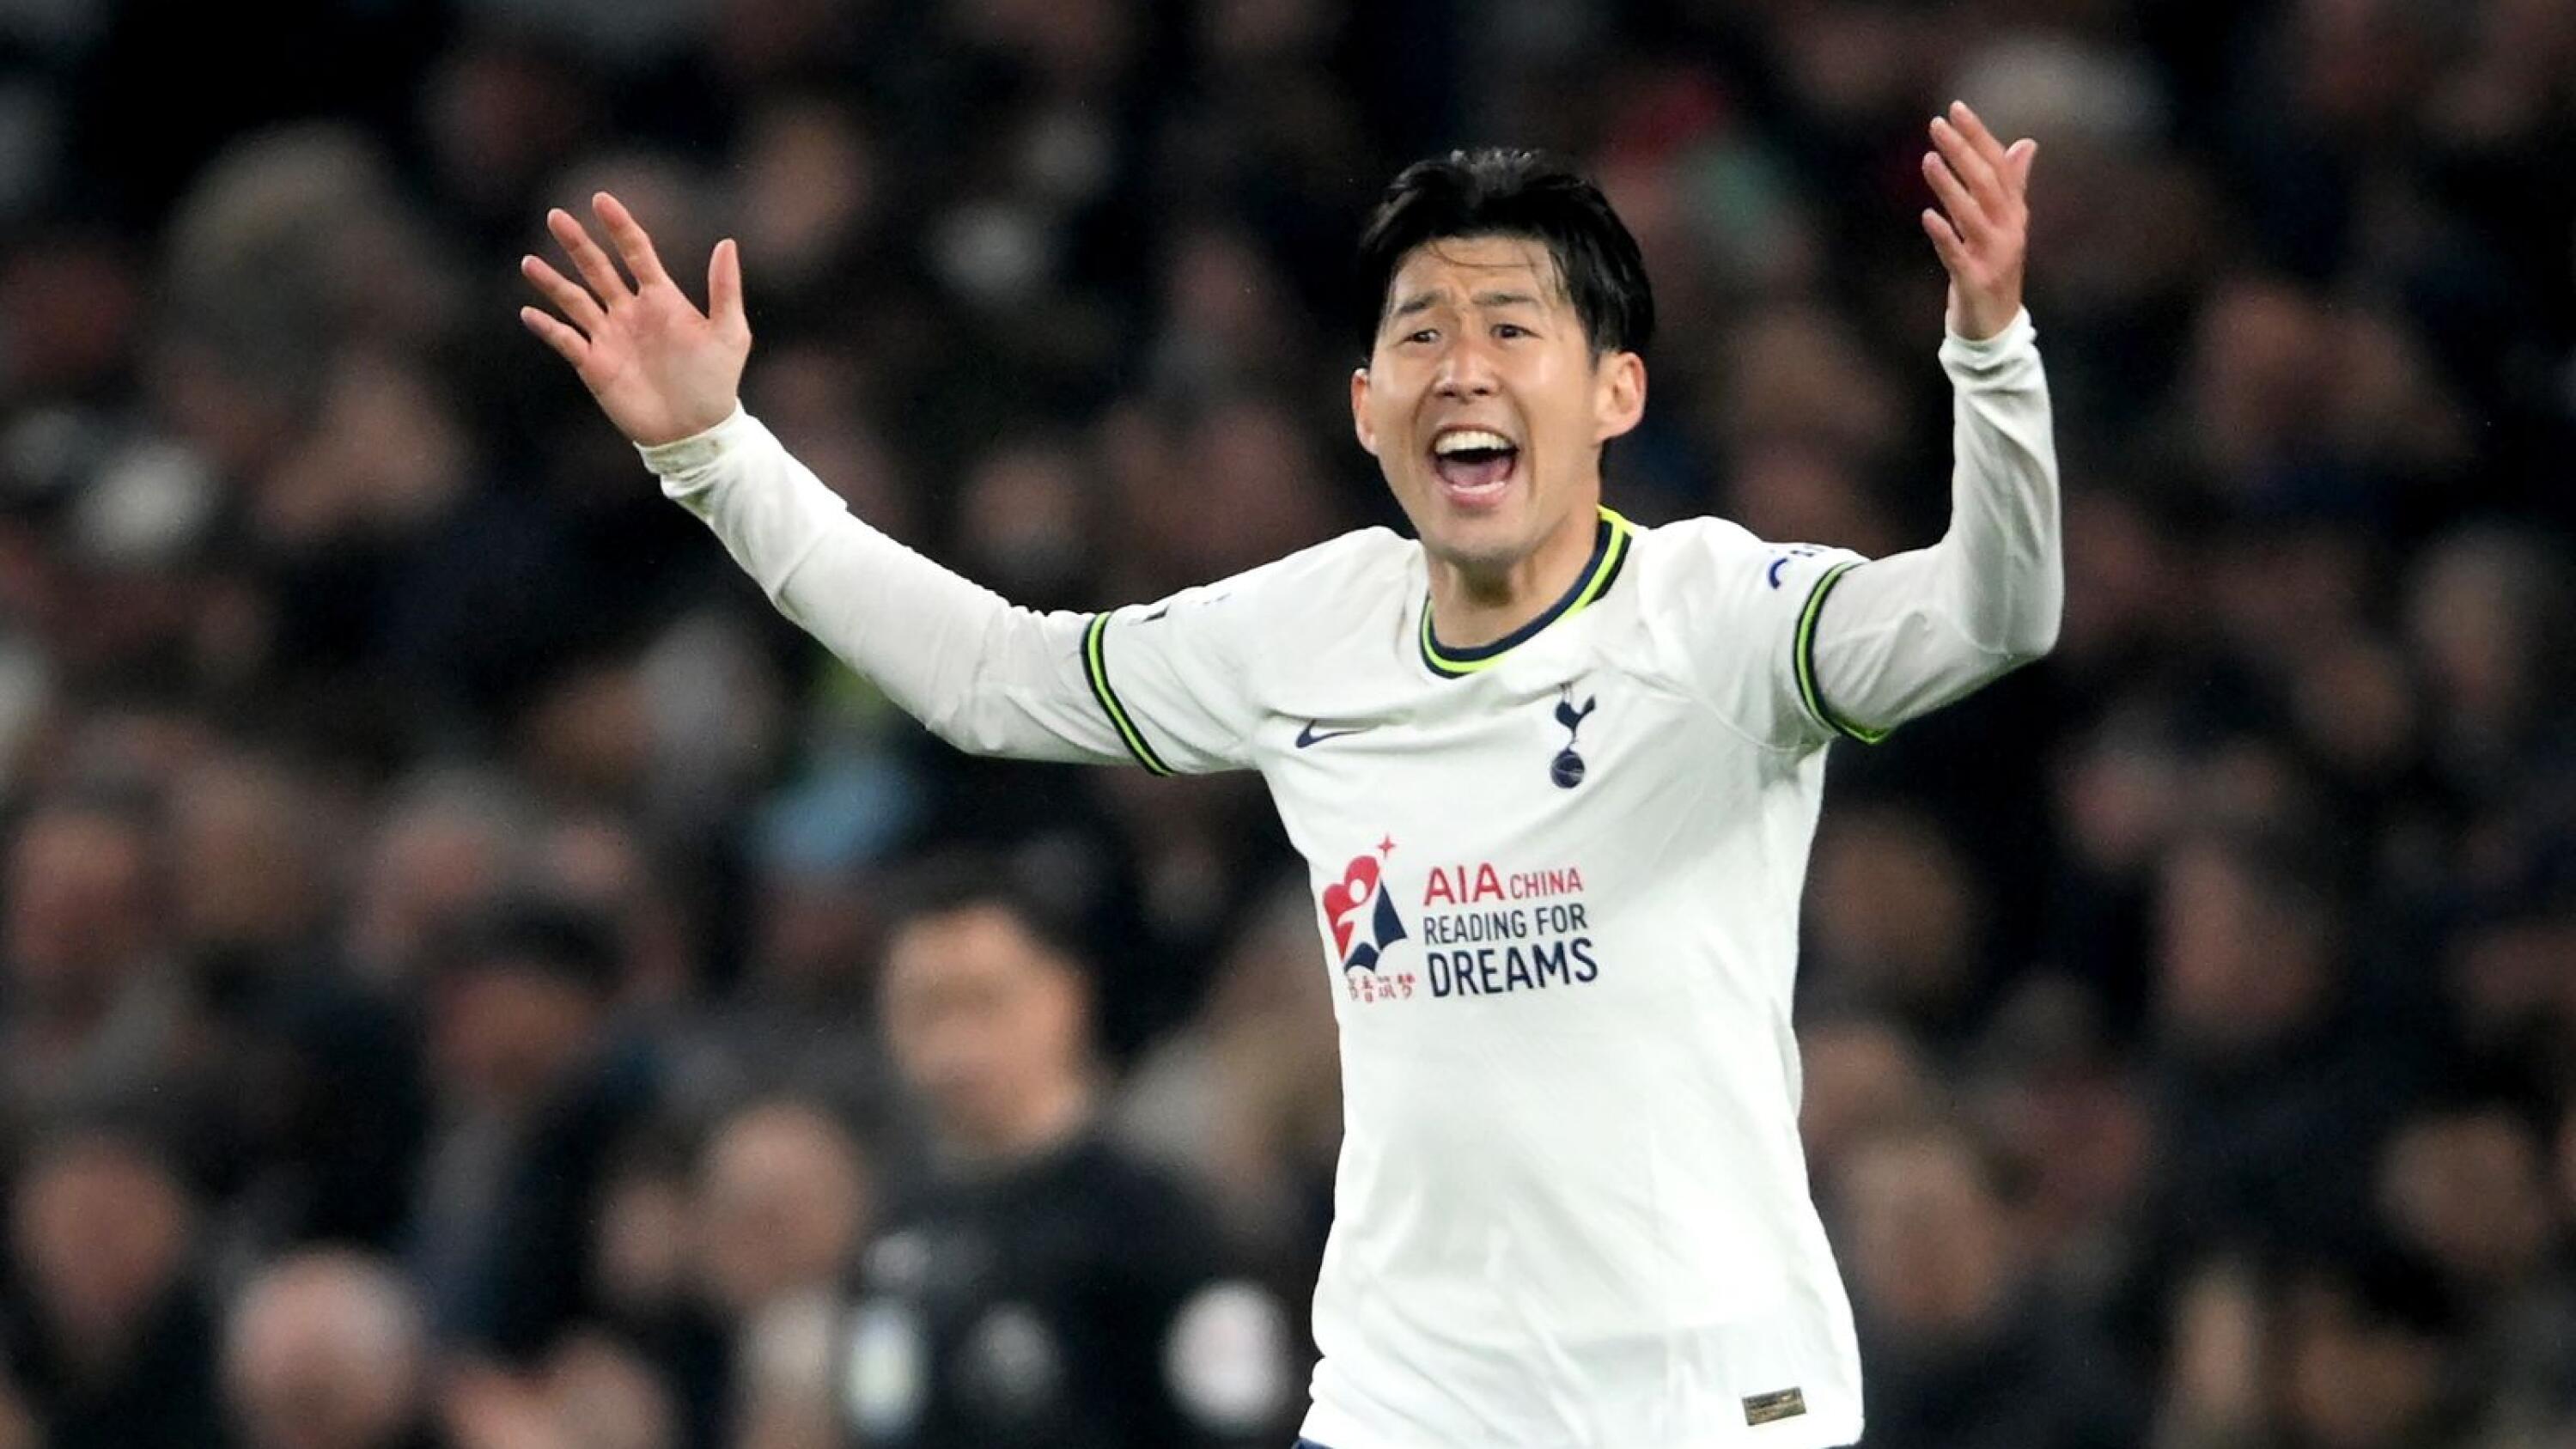 Heung-min of Tottenham celebrates after scoring in the 2-2 draw during the English Premier League match between Tottenham Hotspur and Manchester United in London